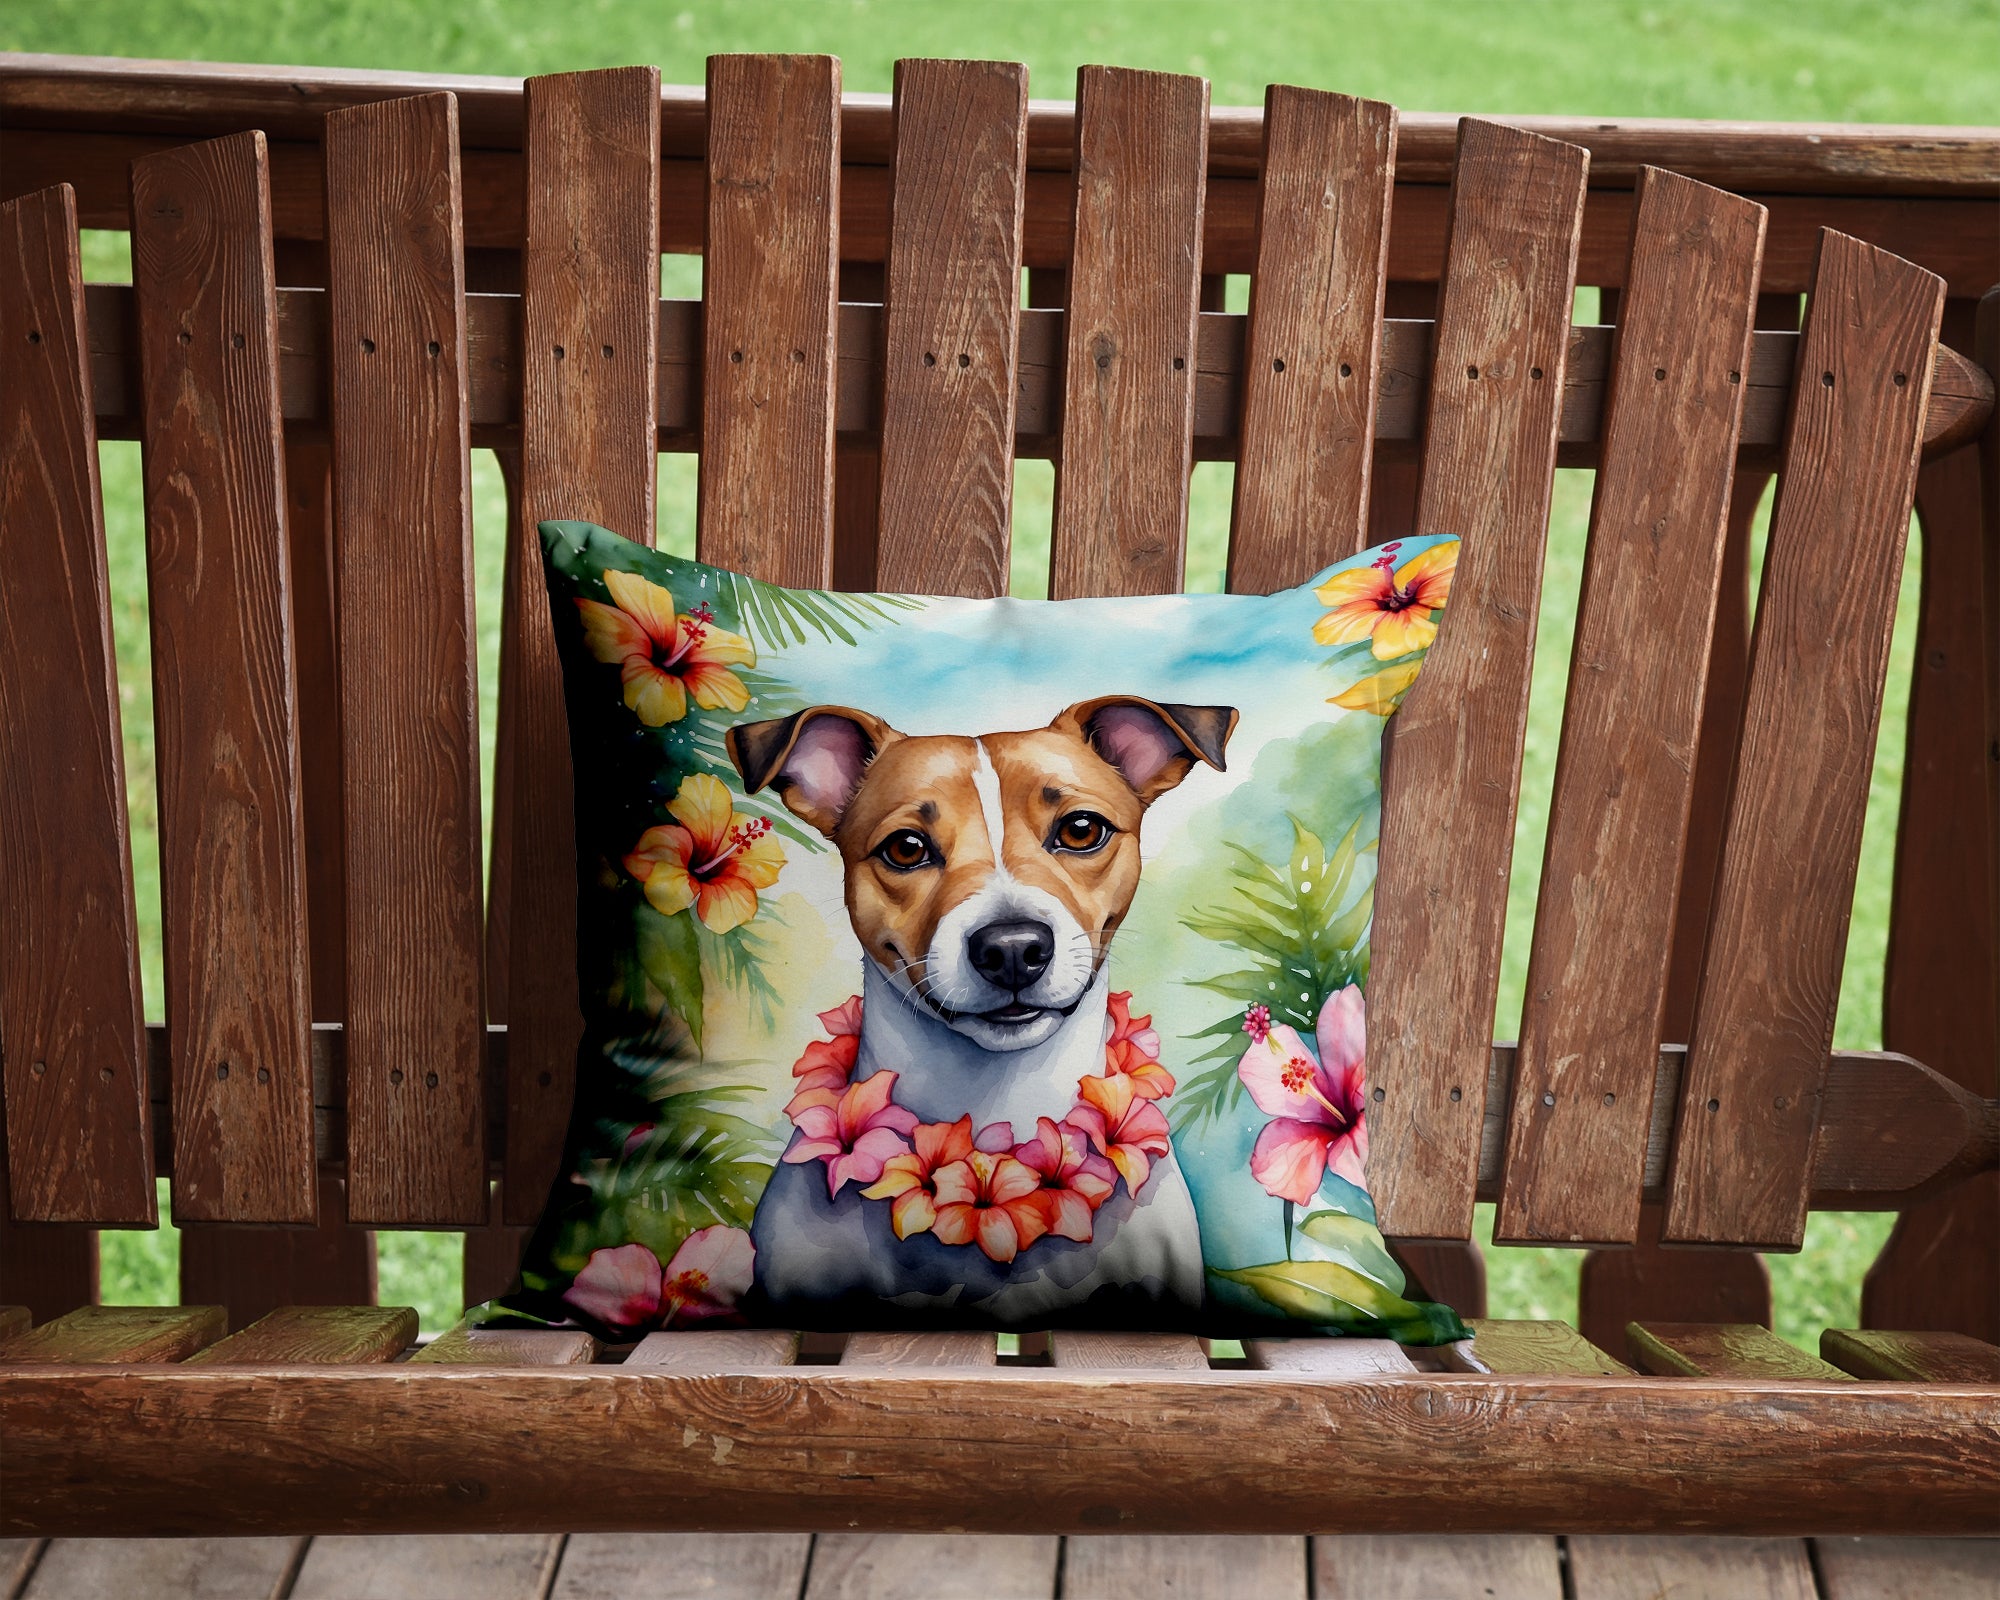 Buy this Jack Russell Terrier Luau Throw Pillow